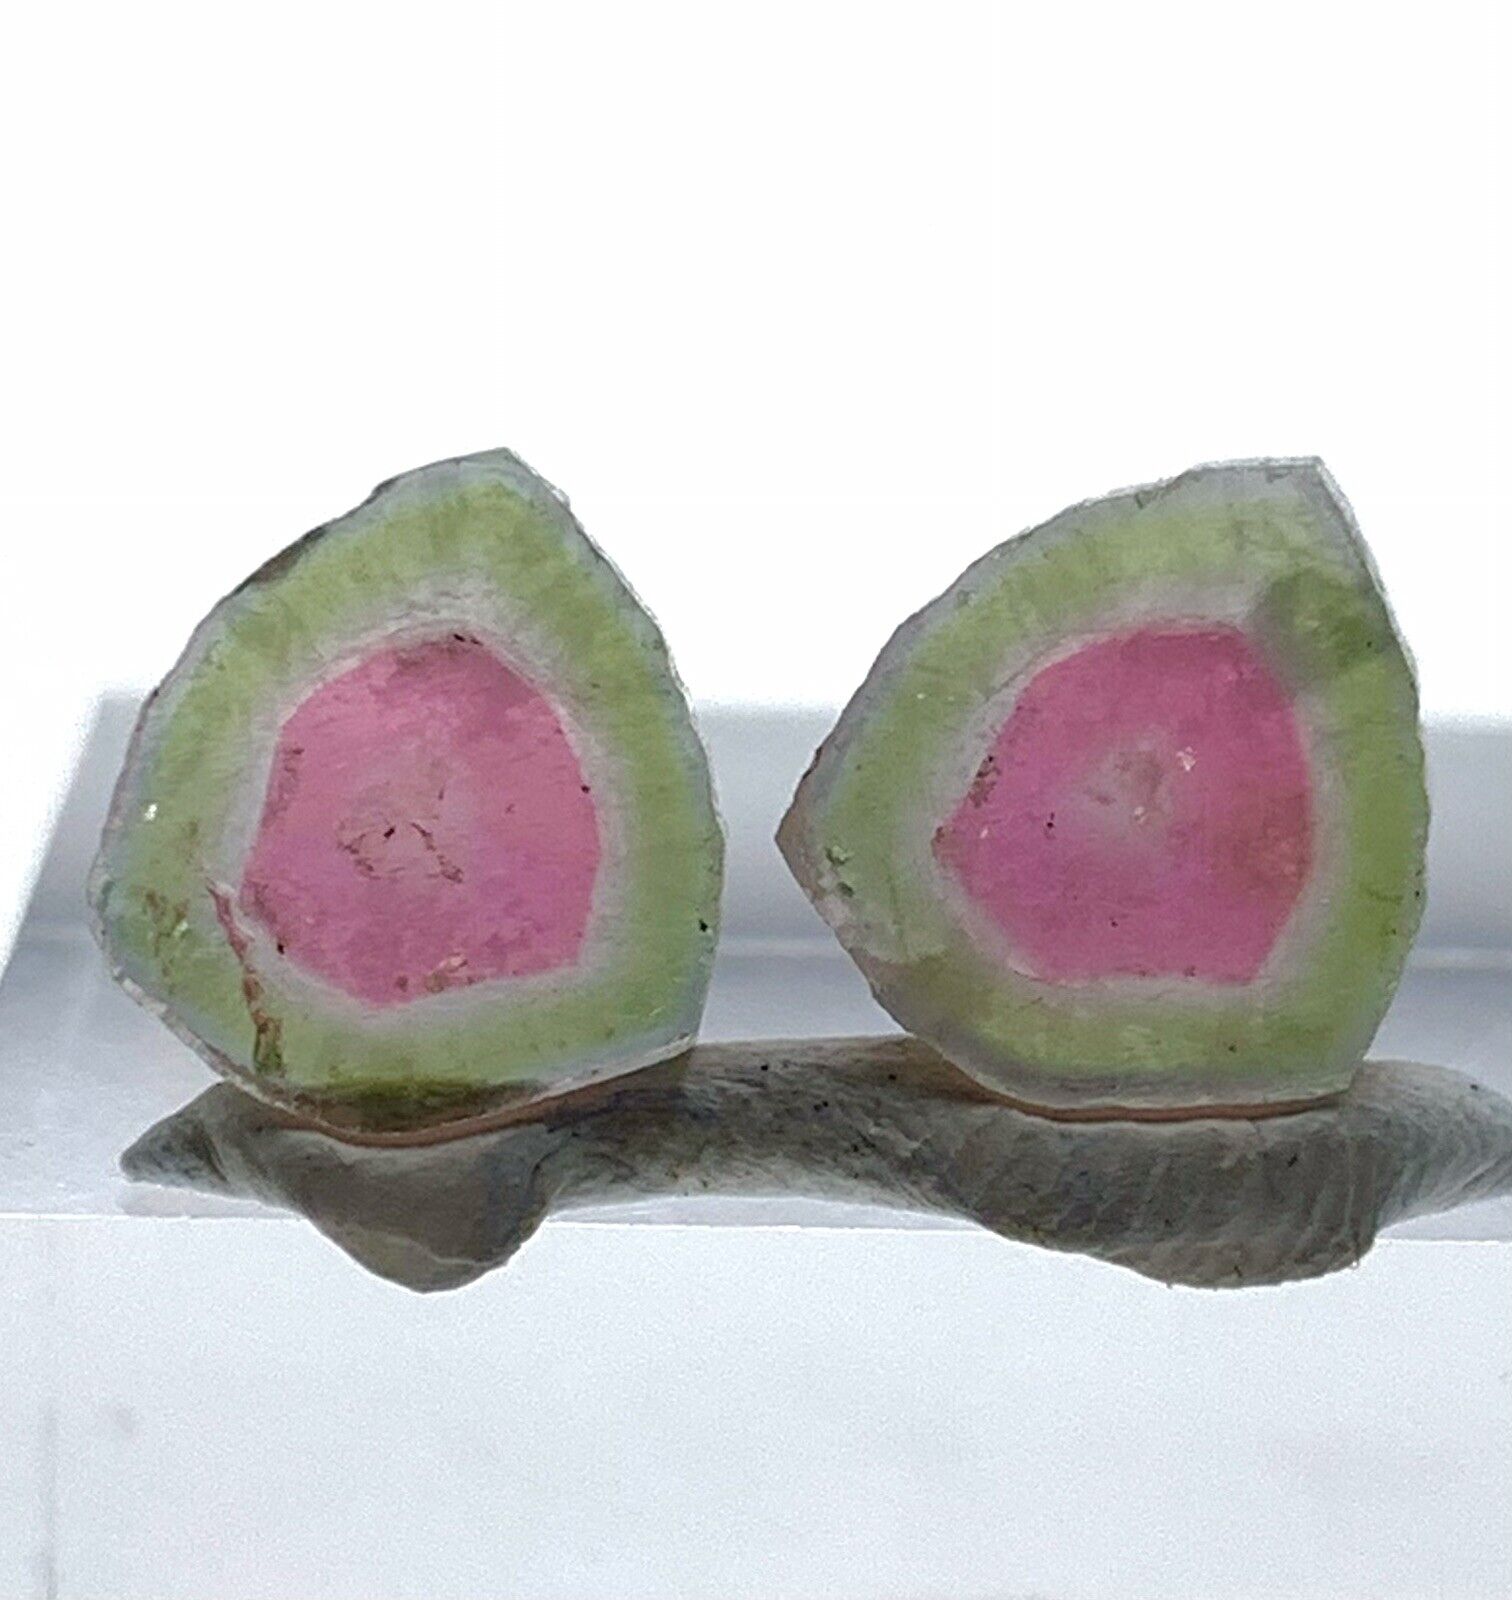 Beautiful Watermelon Tourmaline Slices  ||8.70 CT || From @Afg